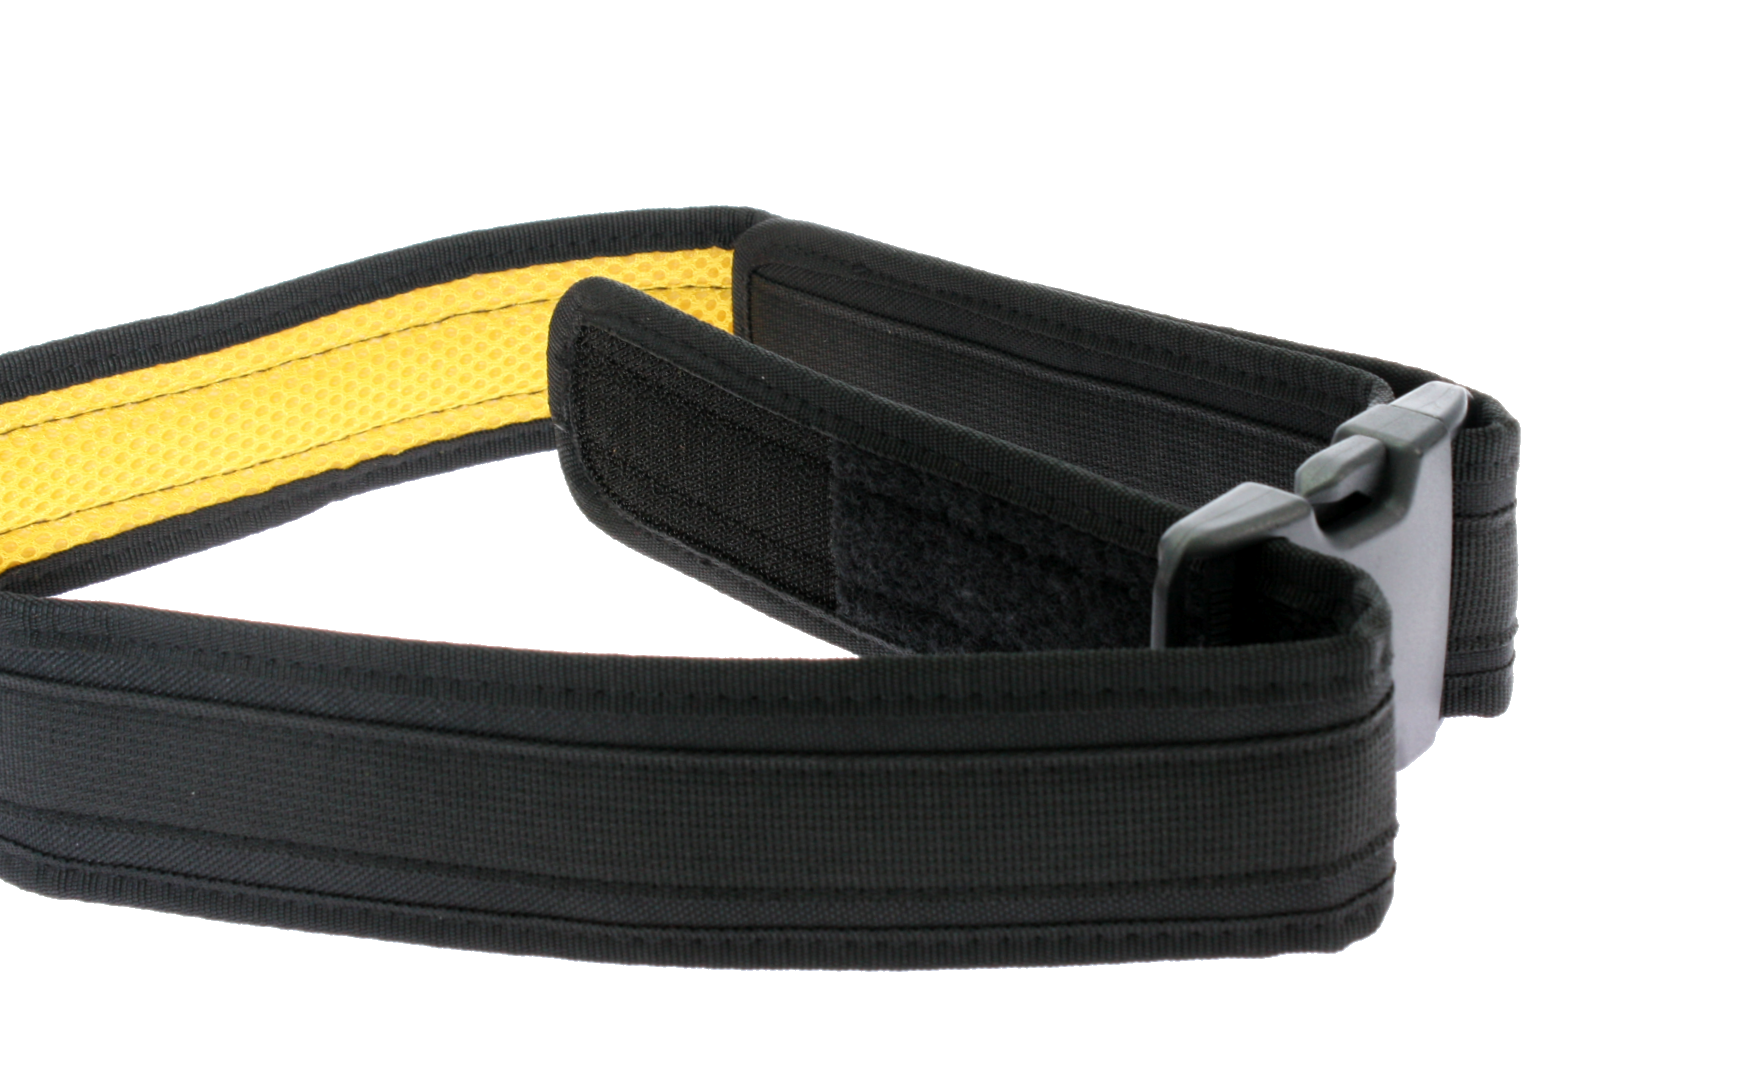 Dirty Rigger 2" Ventilated Belt with the velcro open